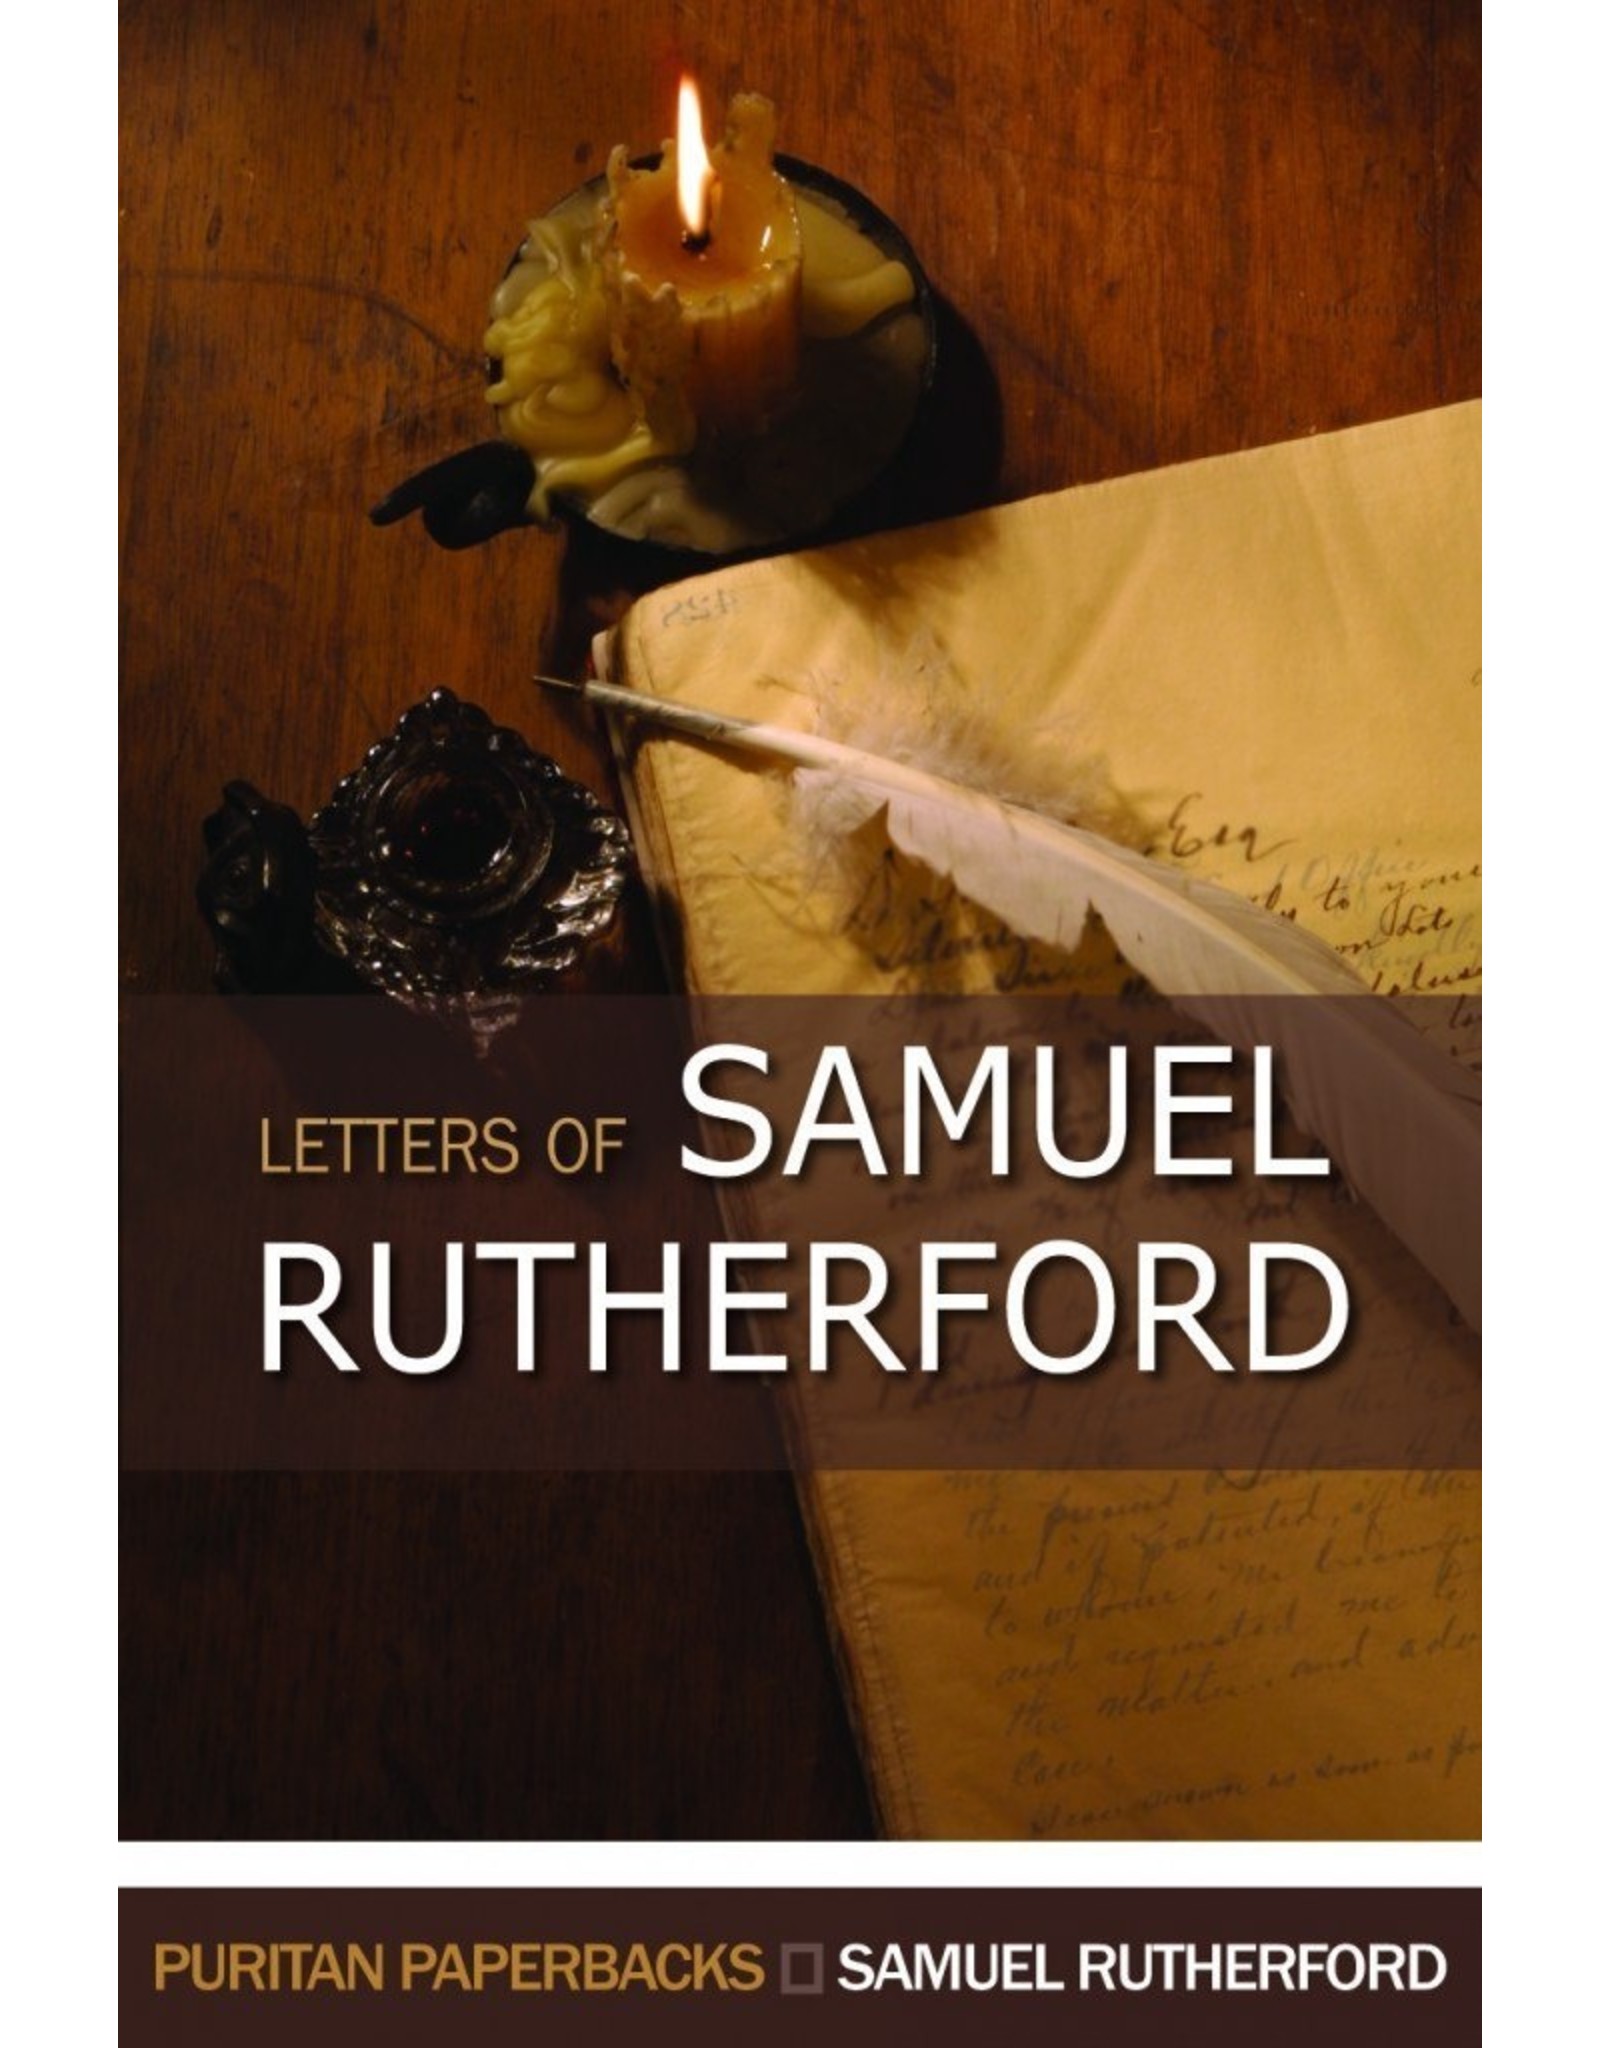 Samuel Rutherford Letters of Samuel Rutherford(Puritan Paperbacks)